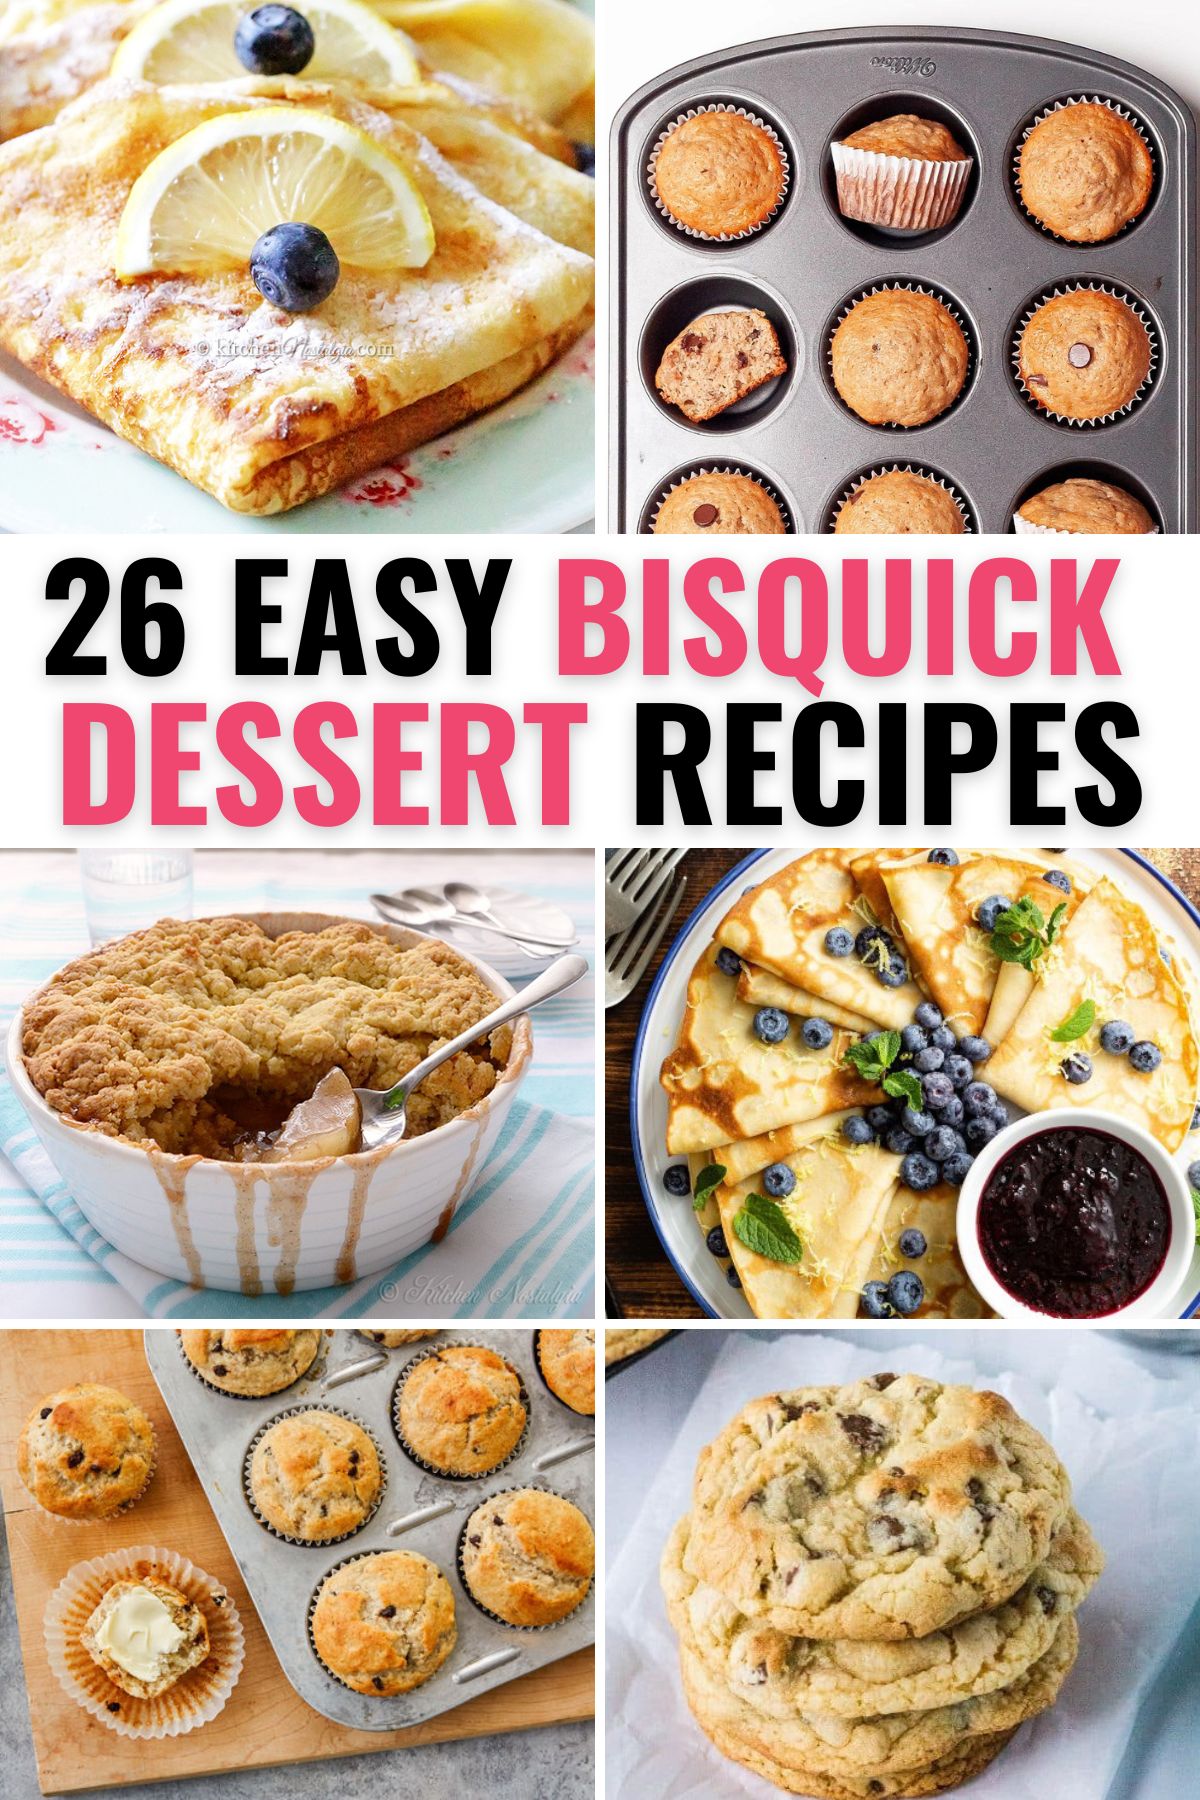 Collection of Bisquick Desserts including crepes, cobblers, muffins, and cookies.